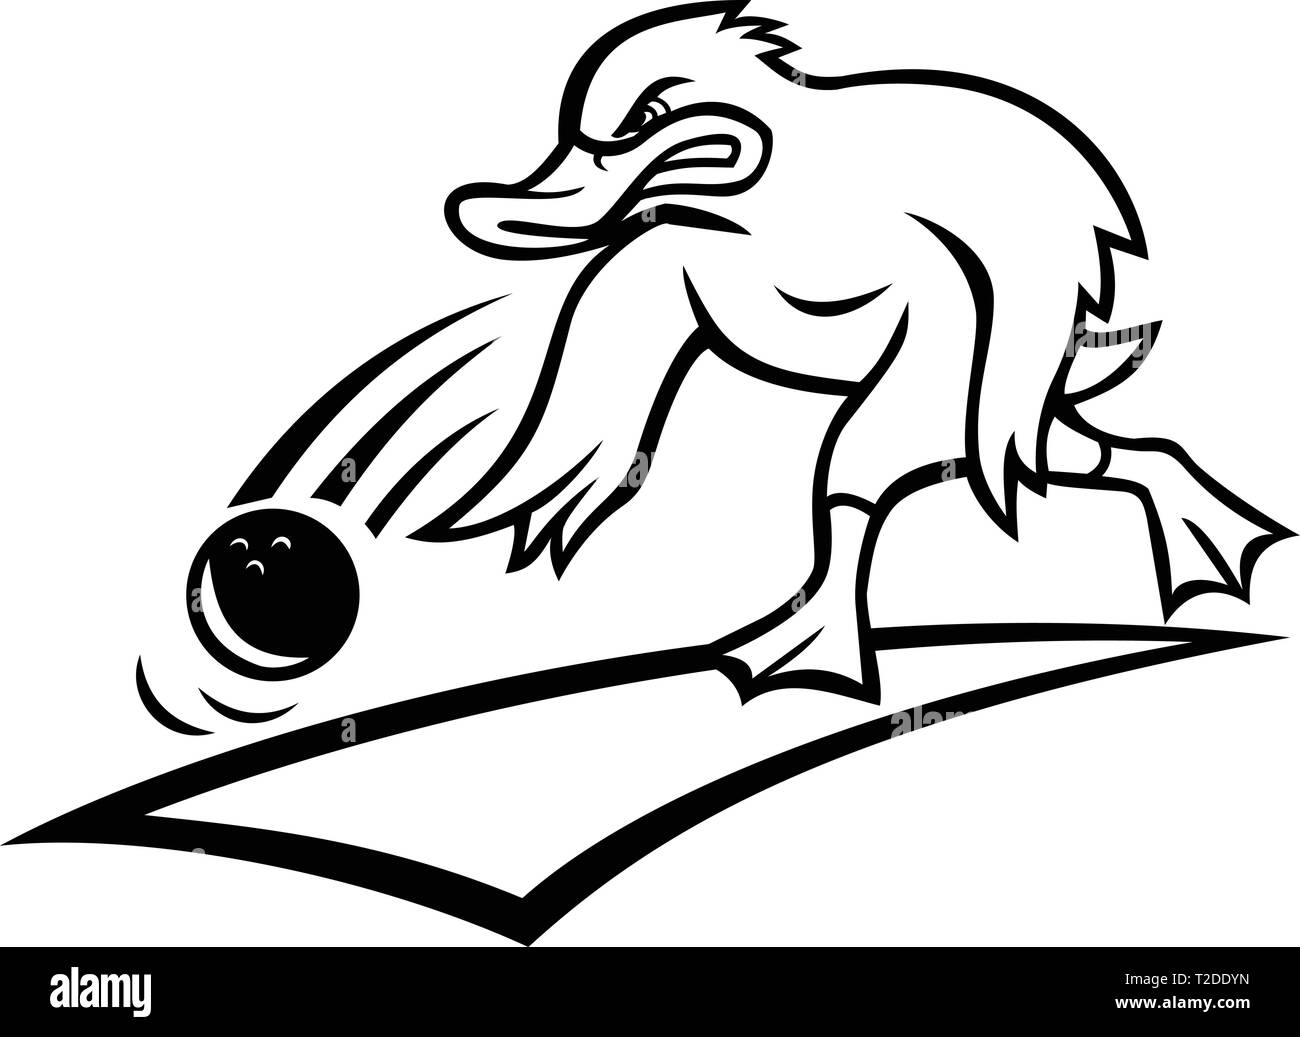 Cartoon mascot style illustration of an angry bowler duck or mallard rolling a bowling ball down a wood or synthetic lane viewed from side on isolated Stock Vector